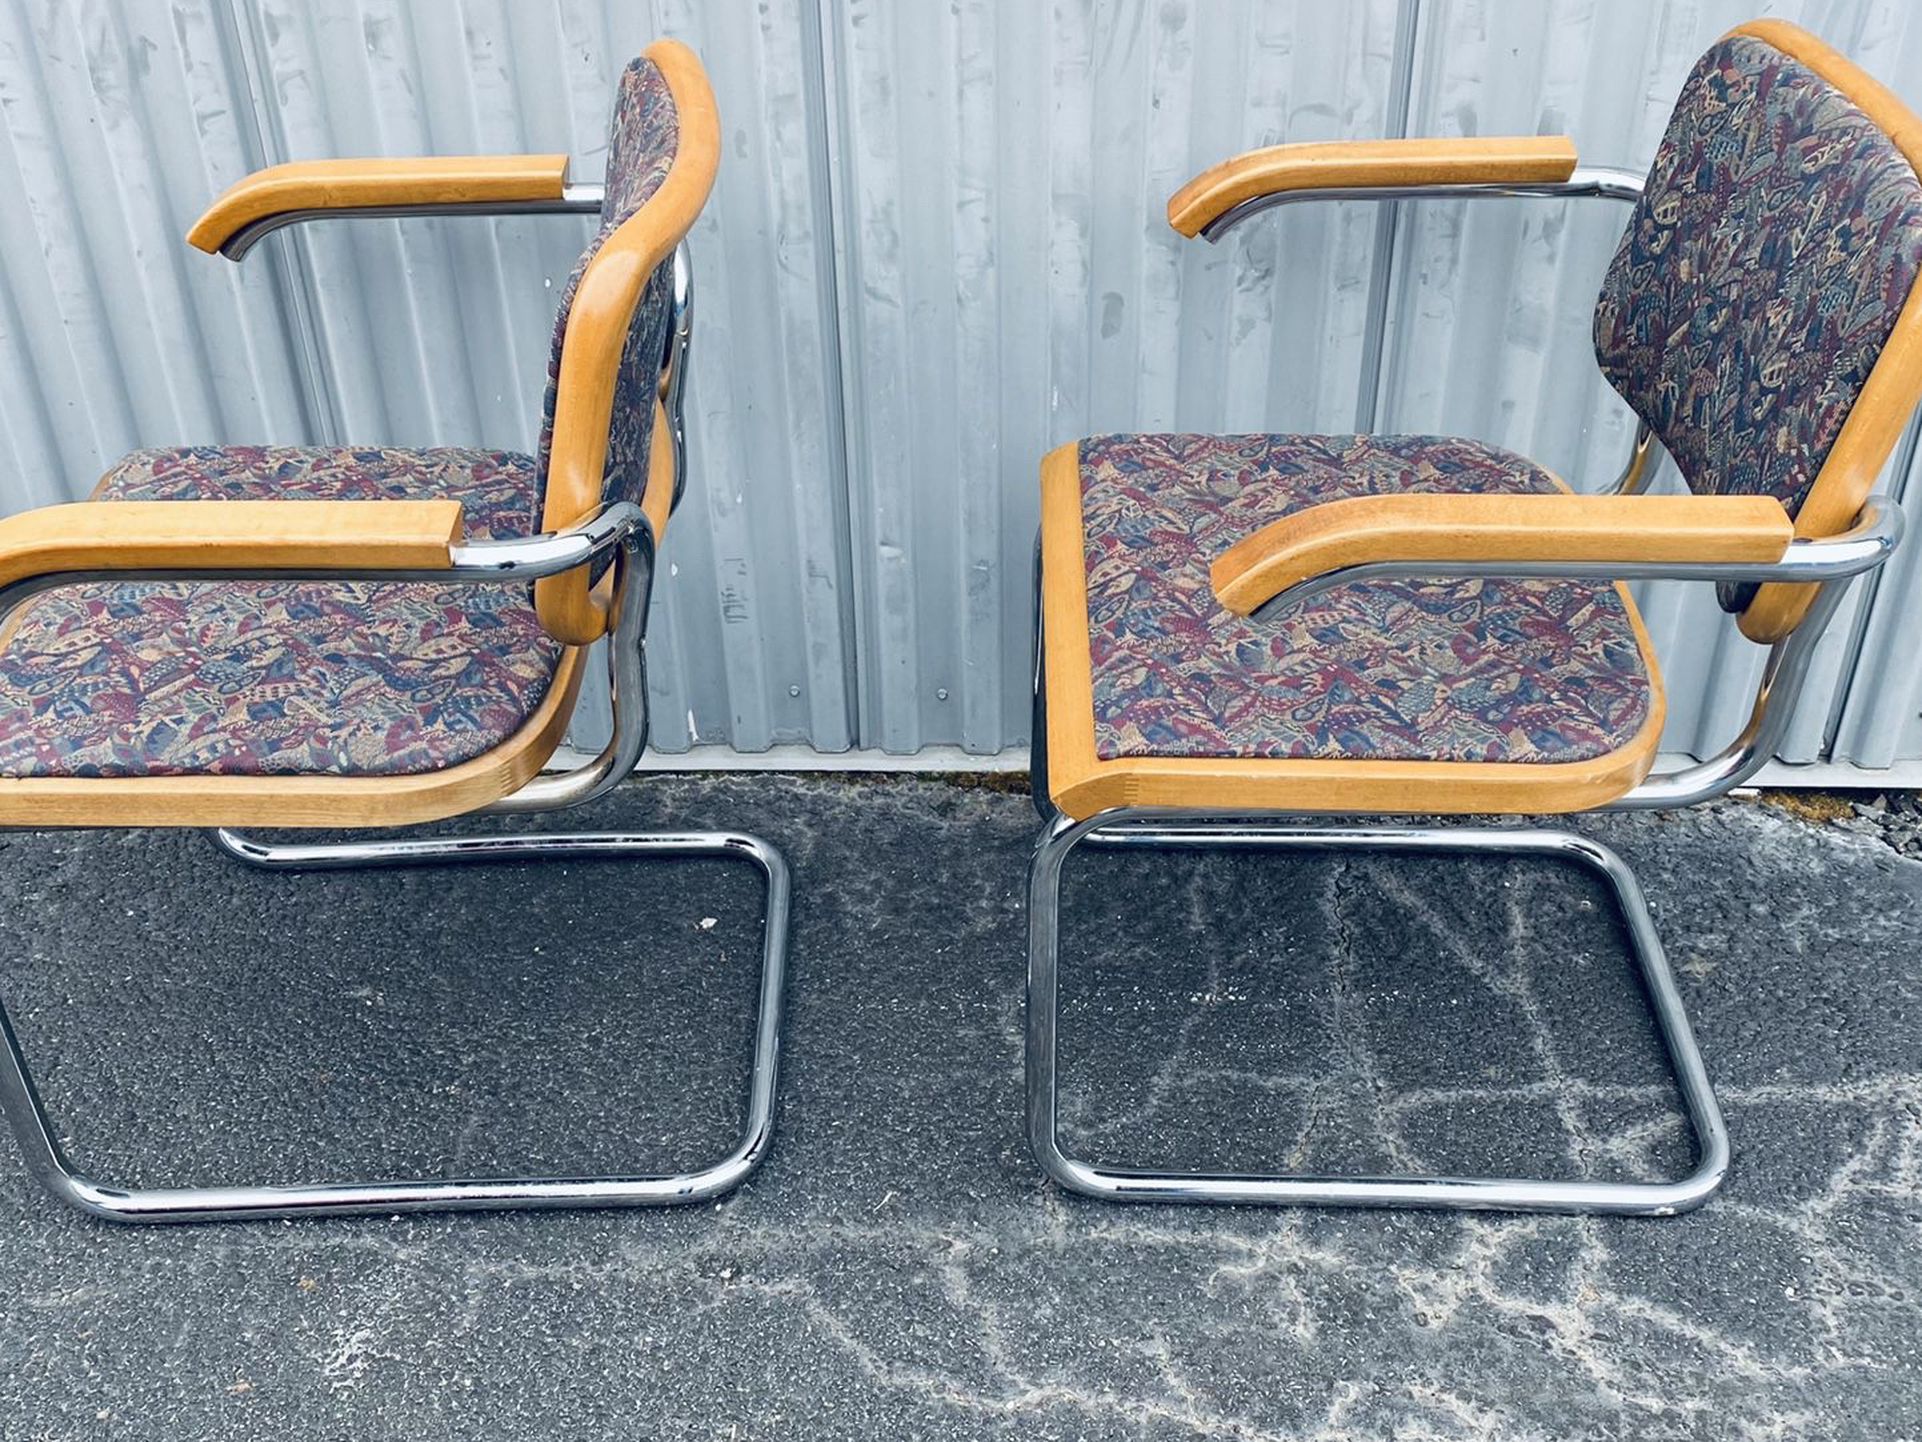 ****MCM Bamboo Chairs (set Of 2) For Sale****